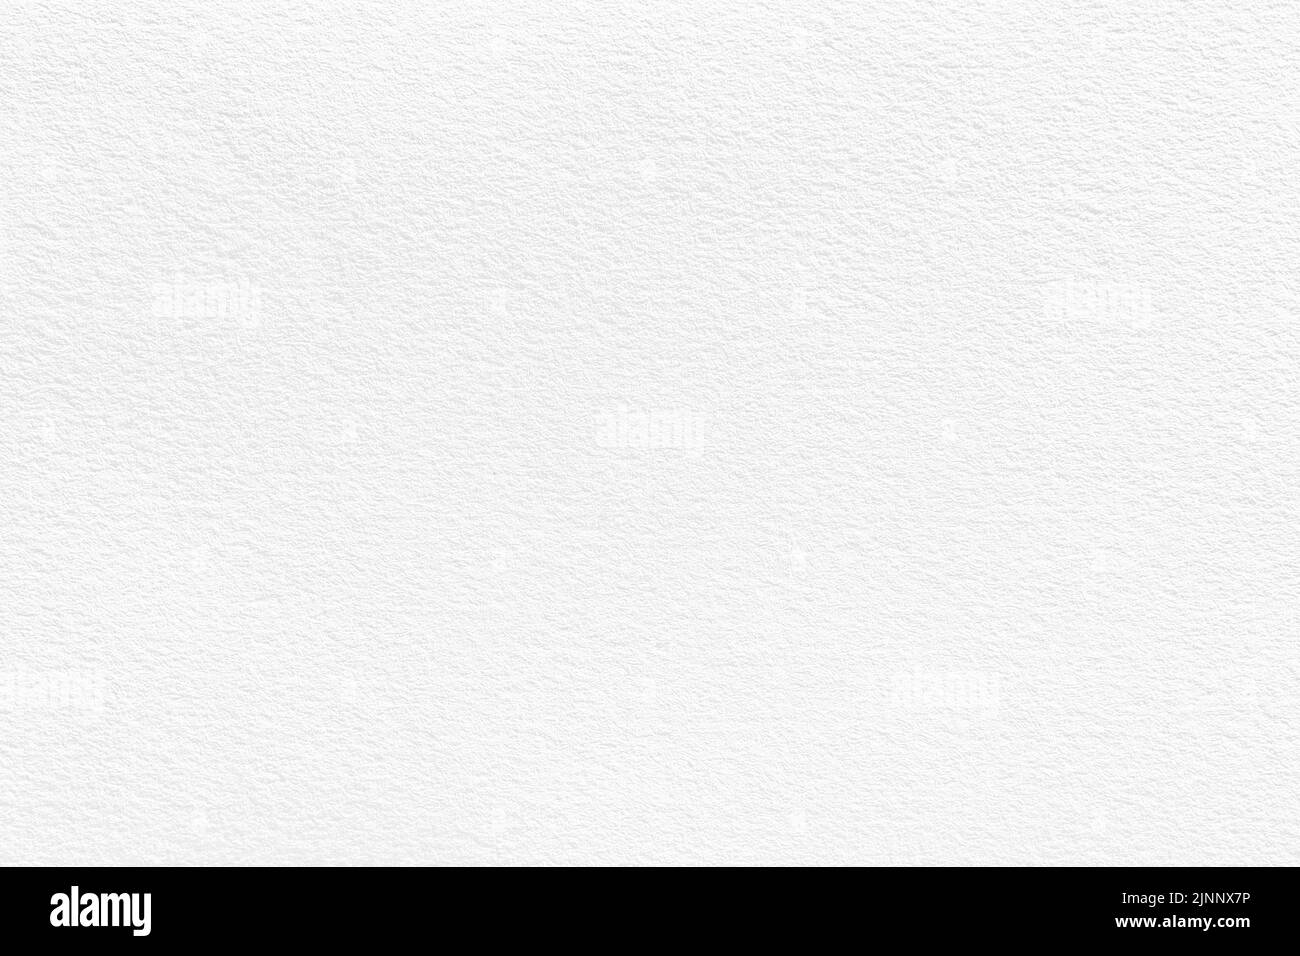 White watercolor papar texture background for cover card design or overlay and paint art backgrounds Stock Photo